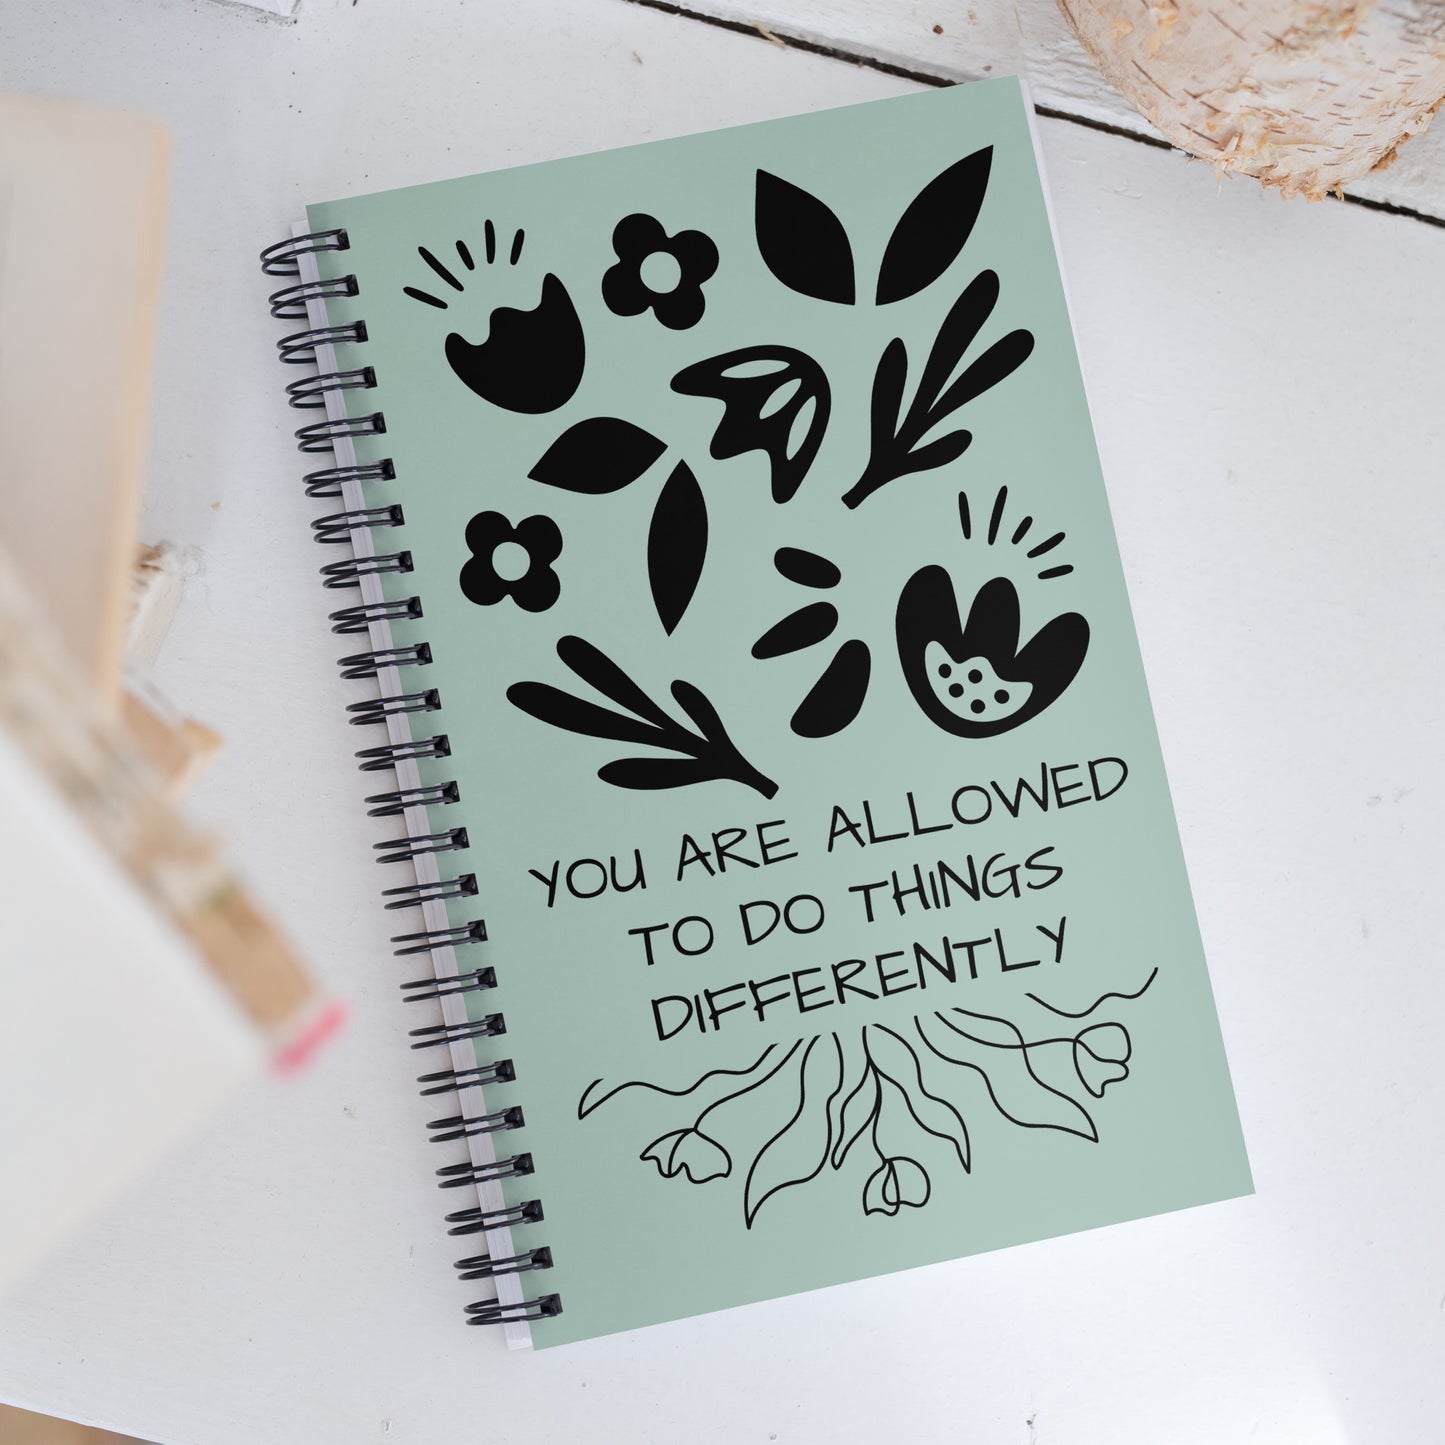 Do Things Differently Spiral Notebook